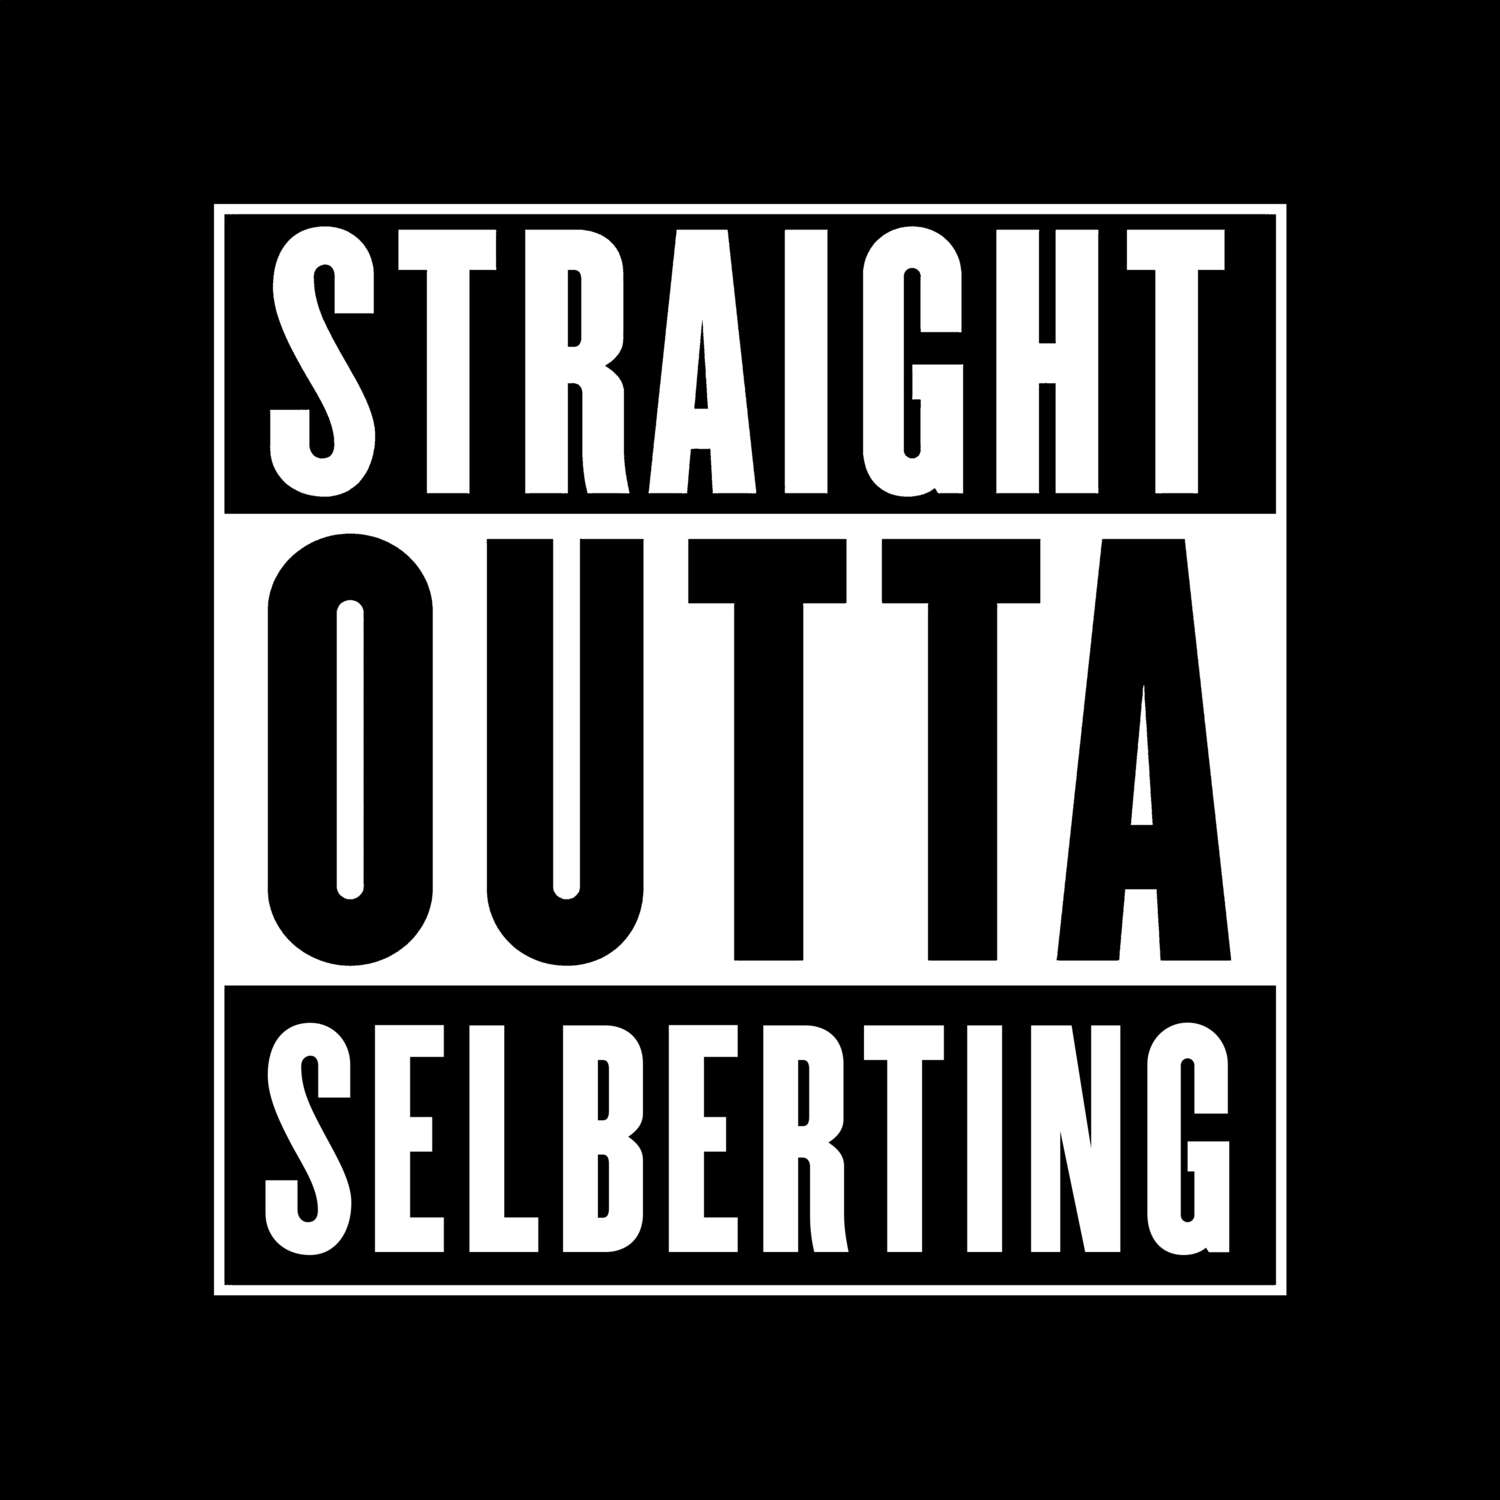 Selberting T-Shirt »Straight Outta«